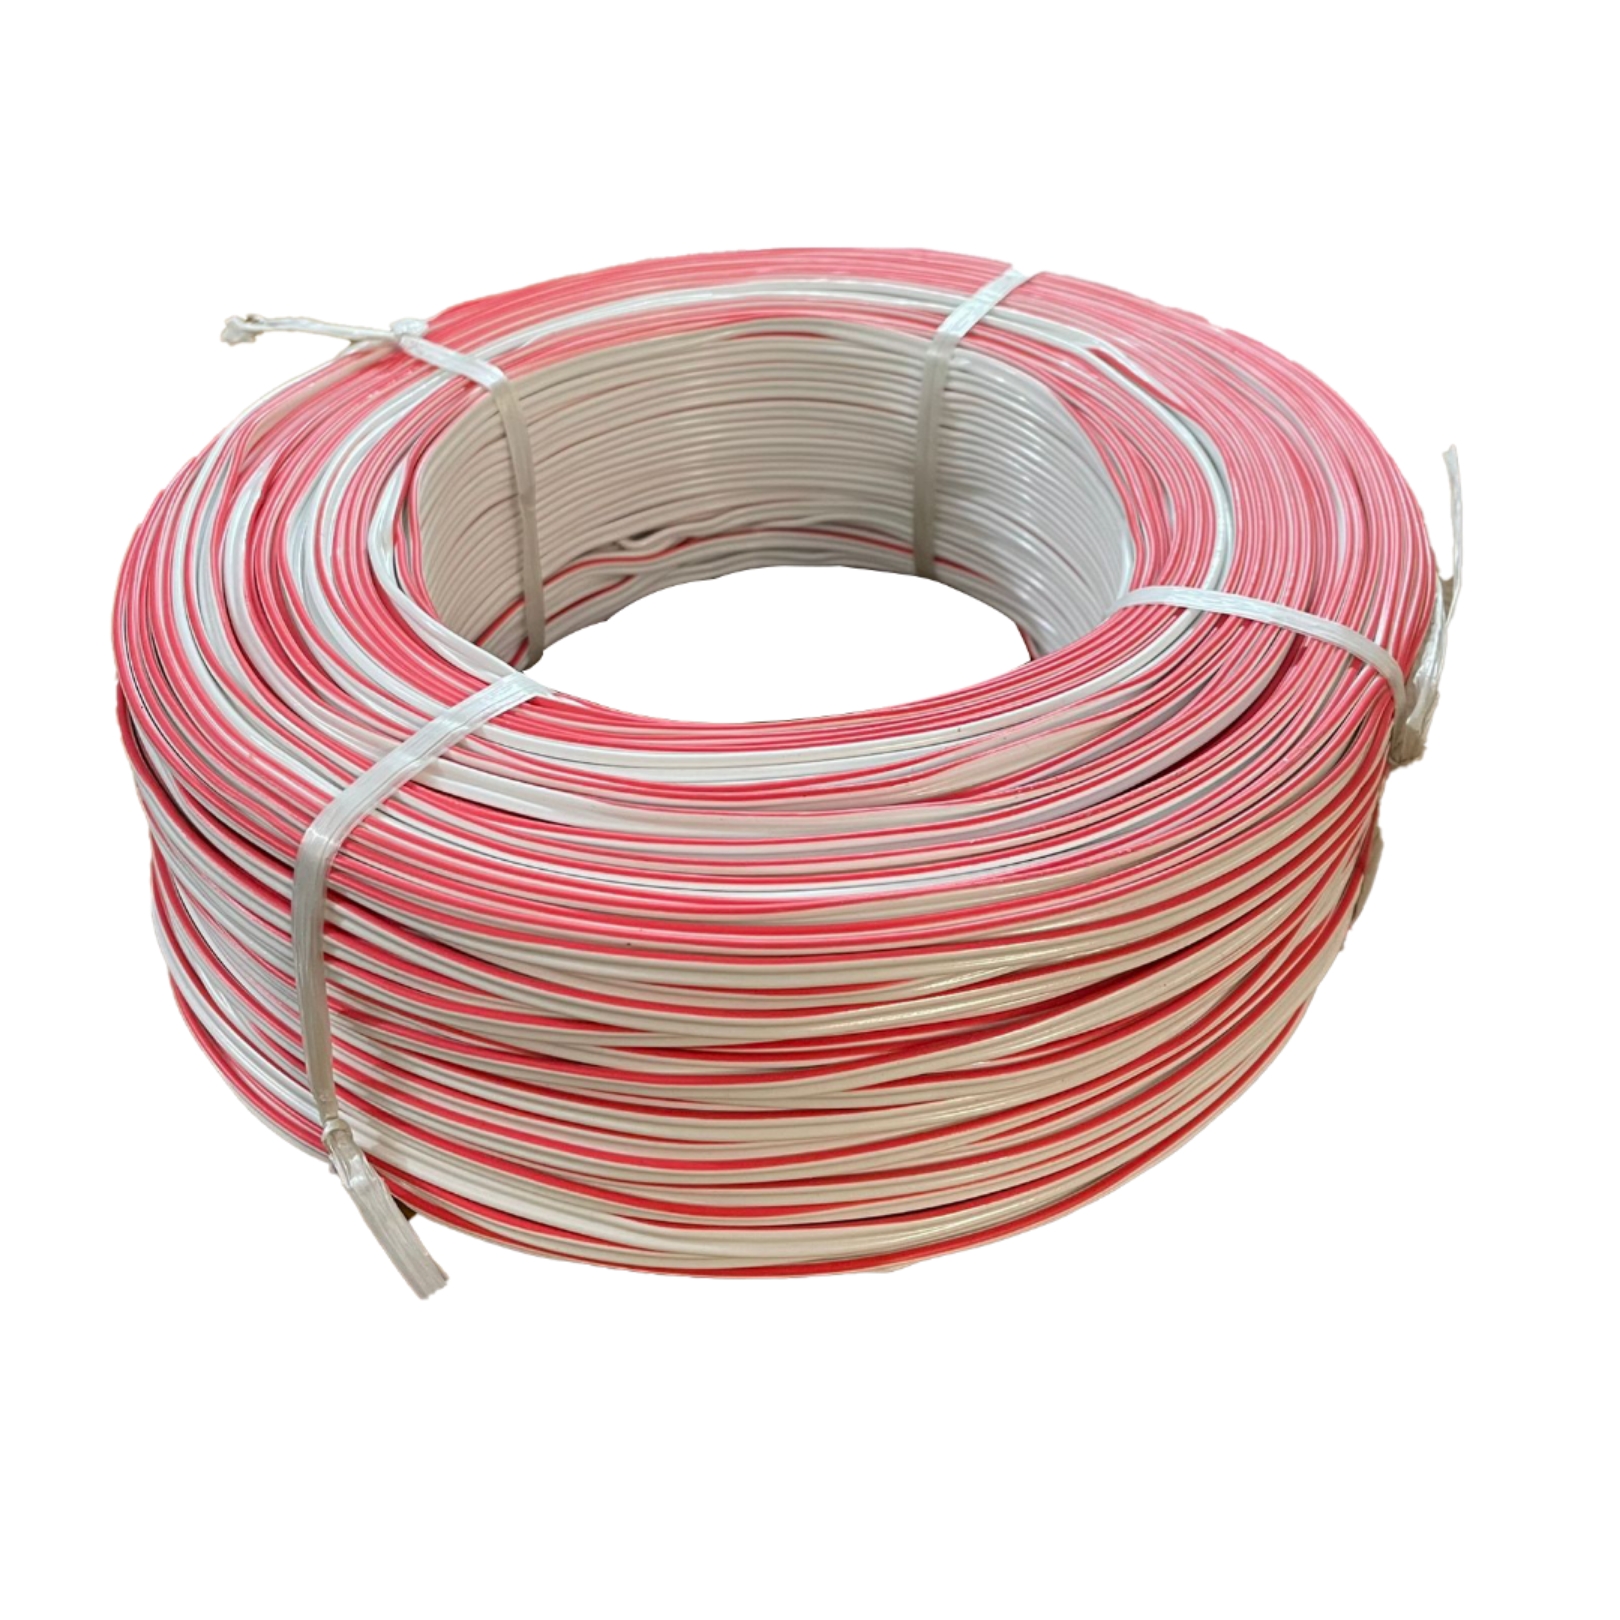 DC WIRE ROLL(WHITE & RED)